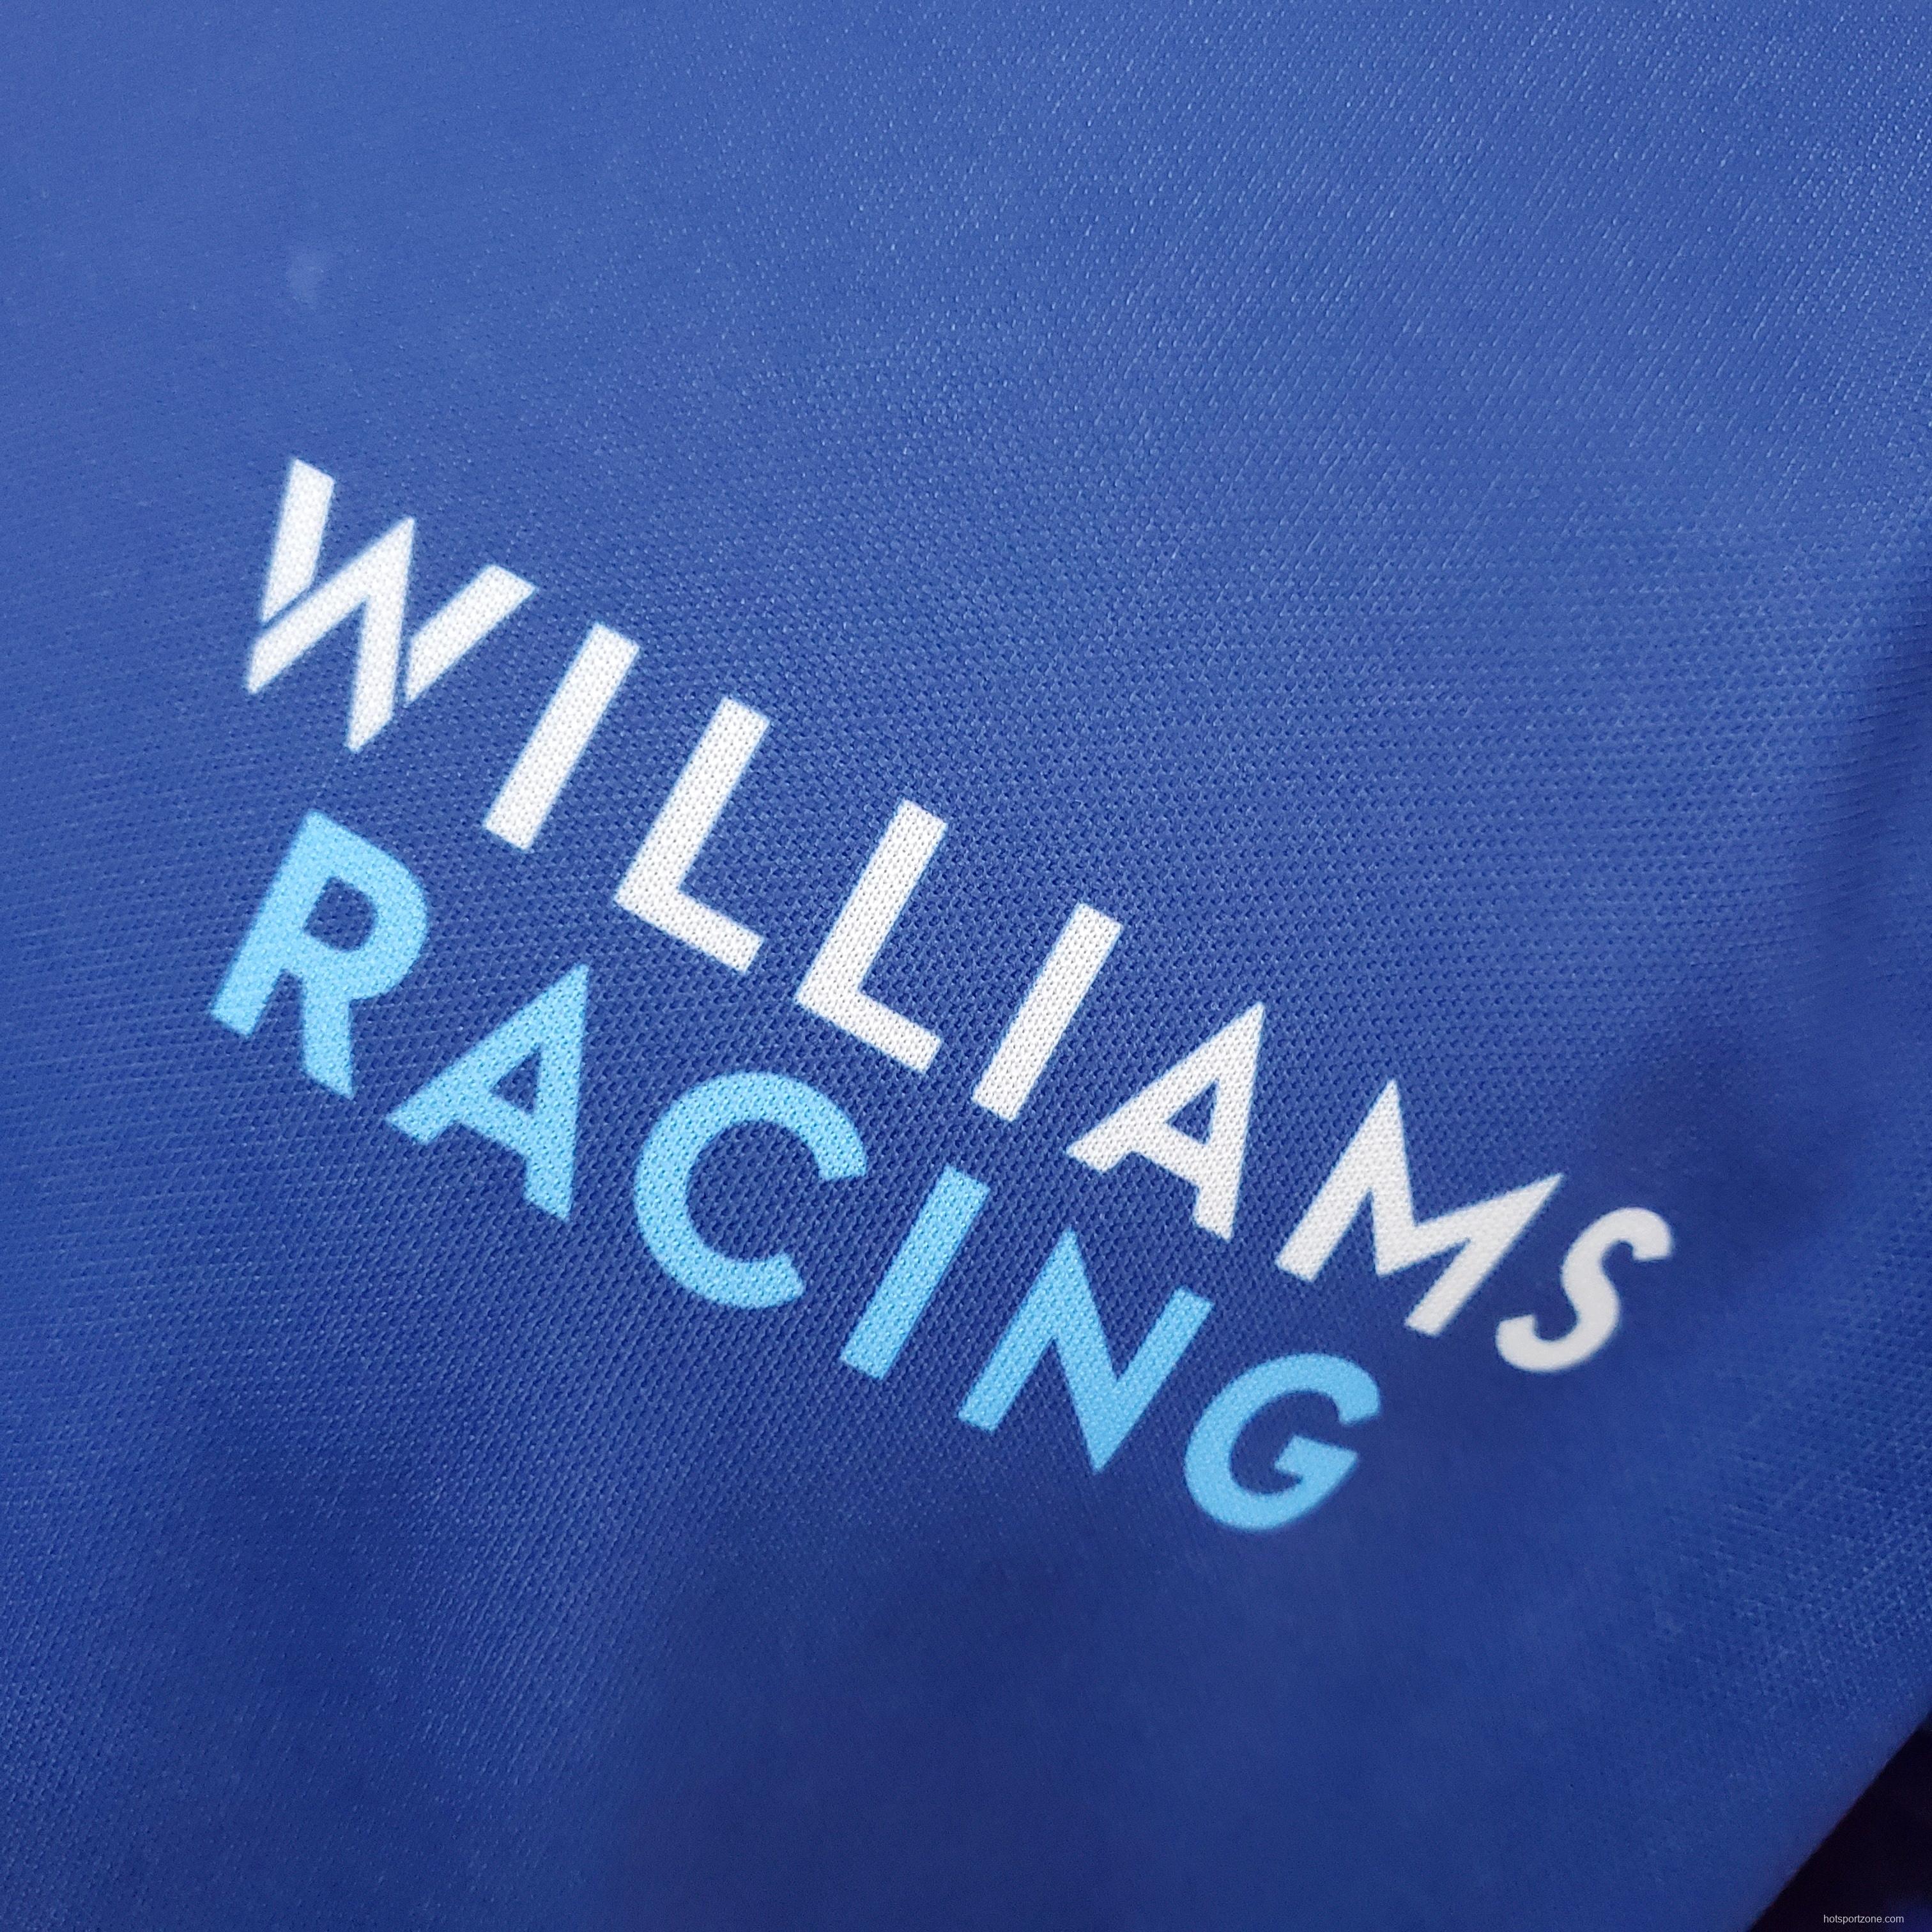 F1 Formula One; Williams racing suit S-5XL